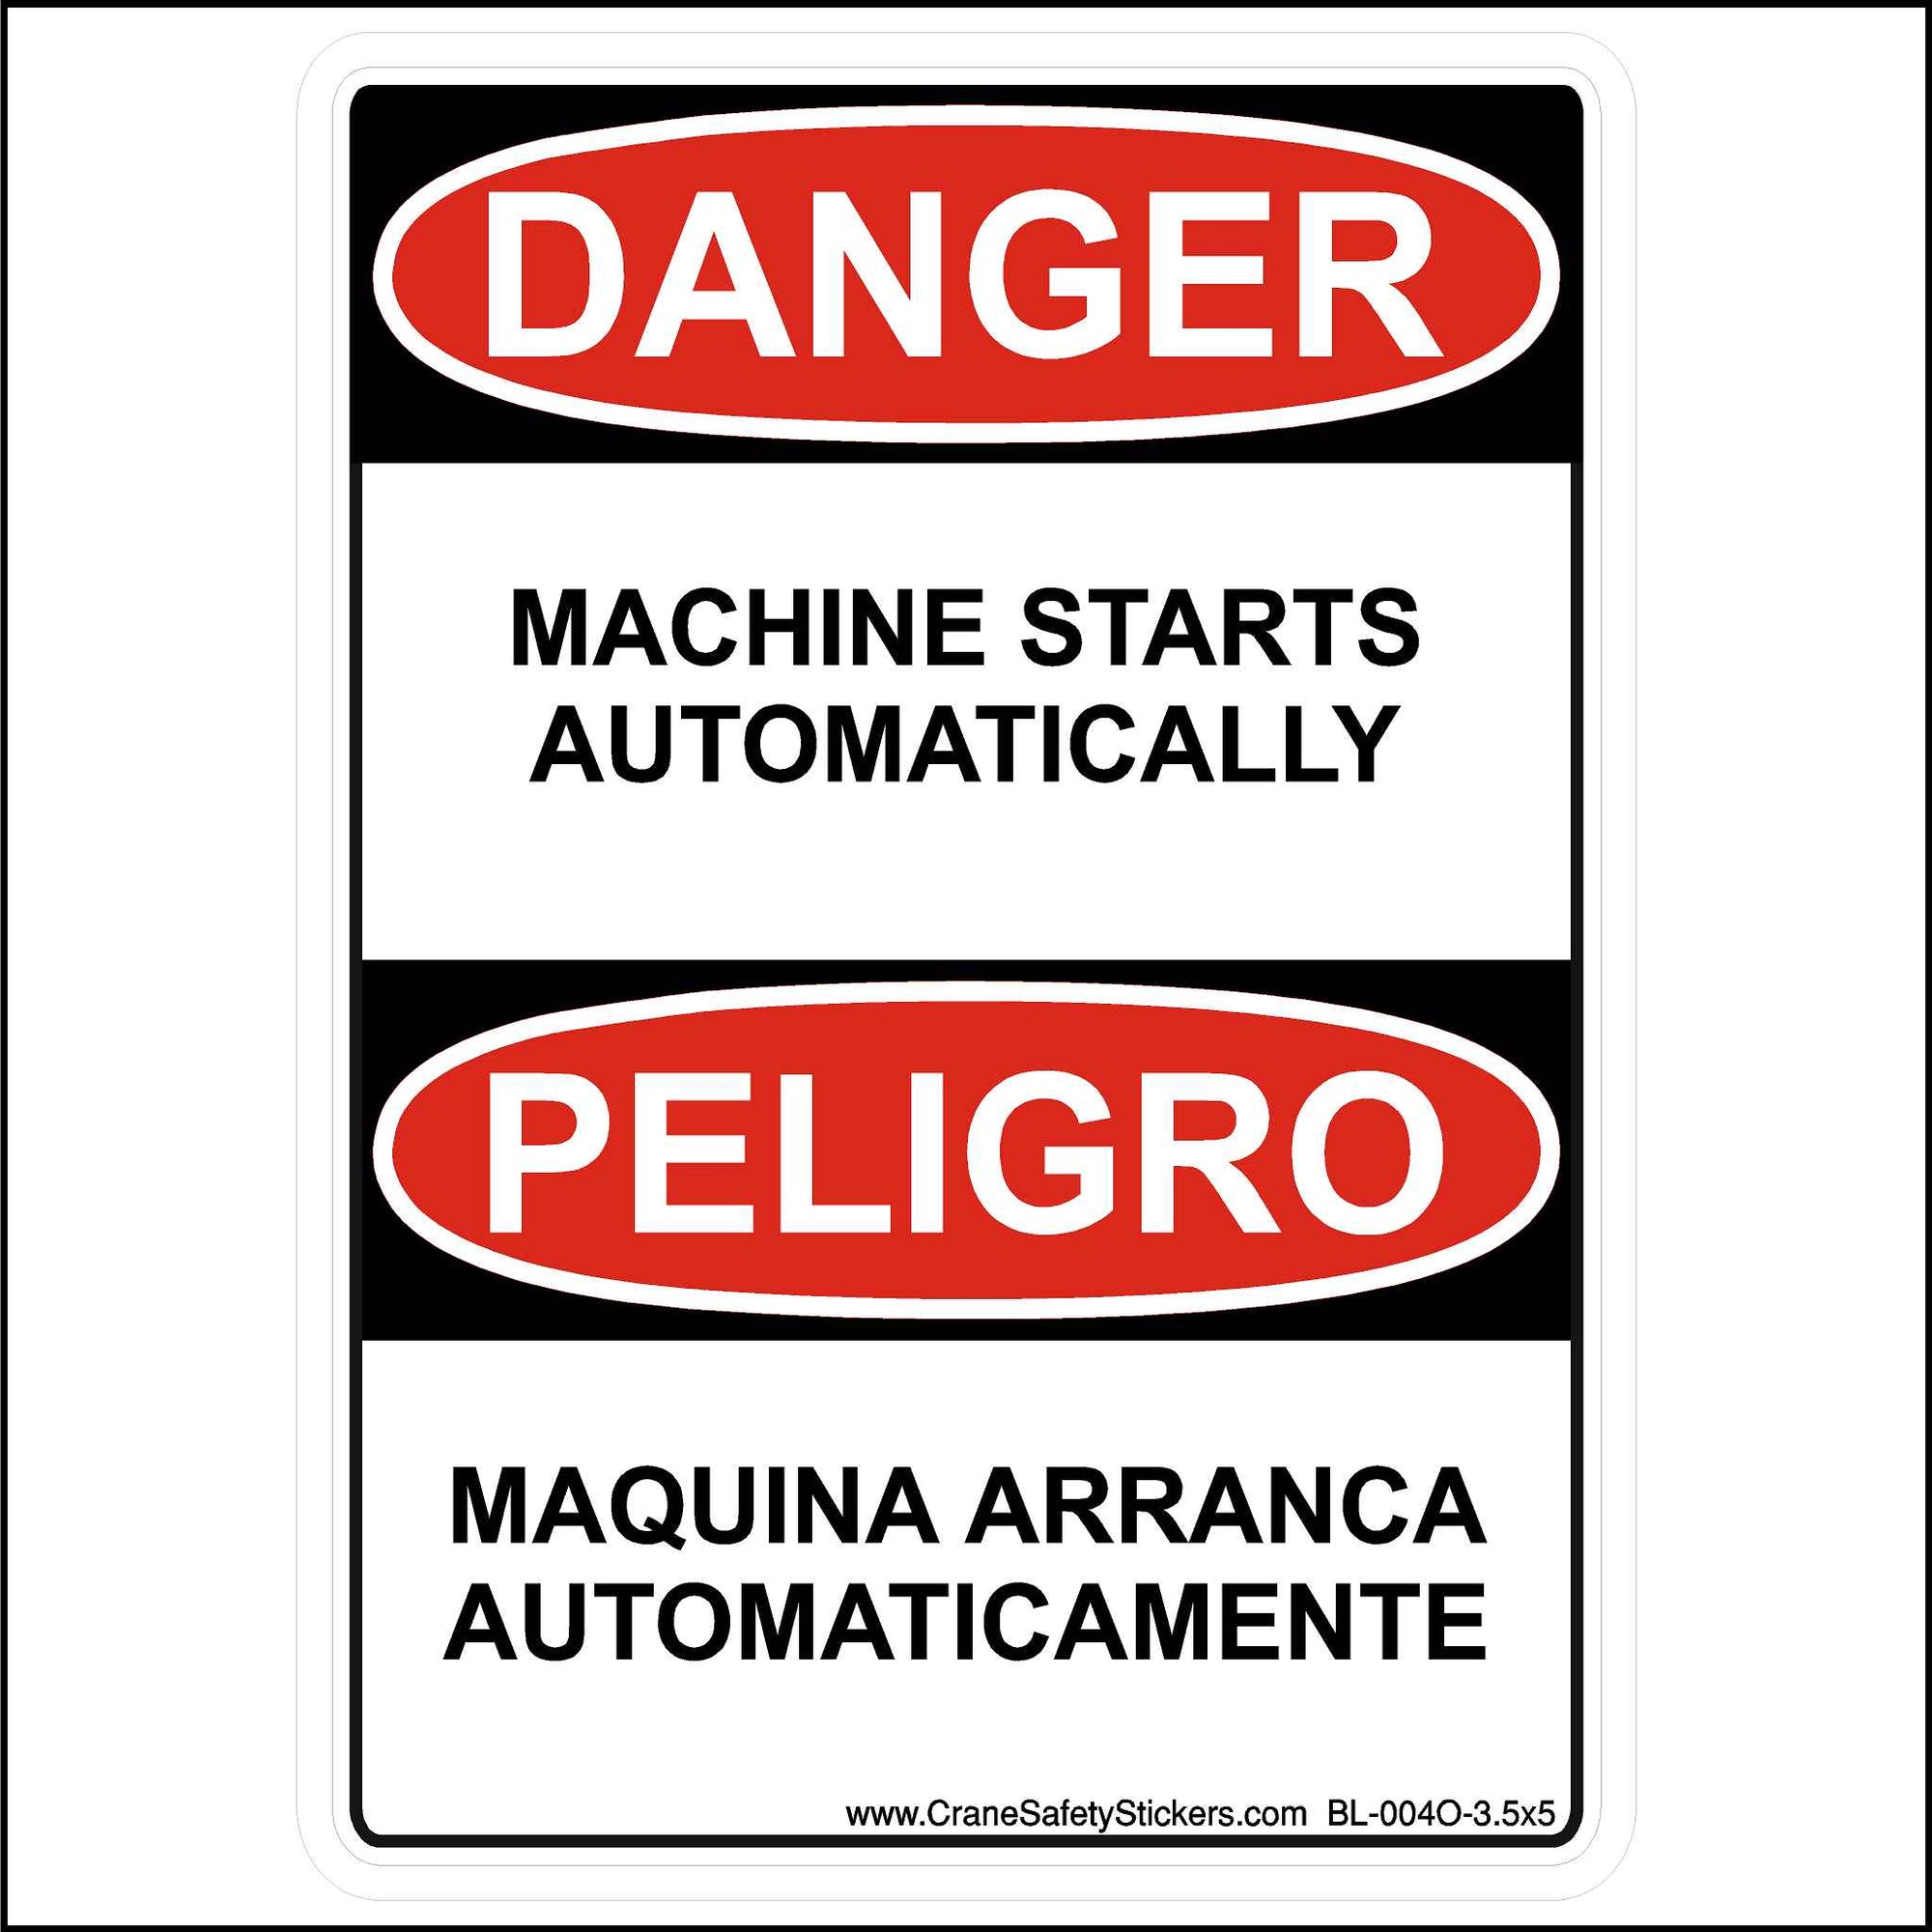 This Bilingual English and Spanish Safety Sticker is Printed With. DANGER Machine Starts Automatically, PELIGRO maquina arranca automaticamente.